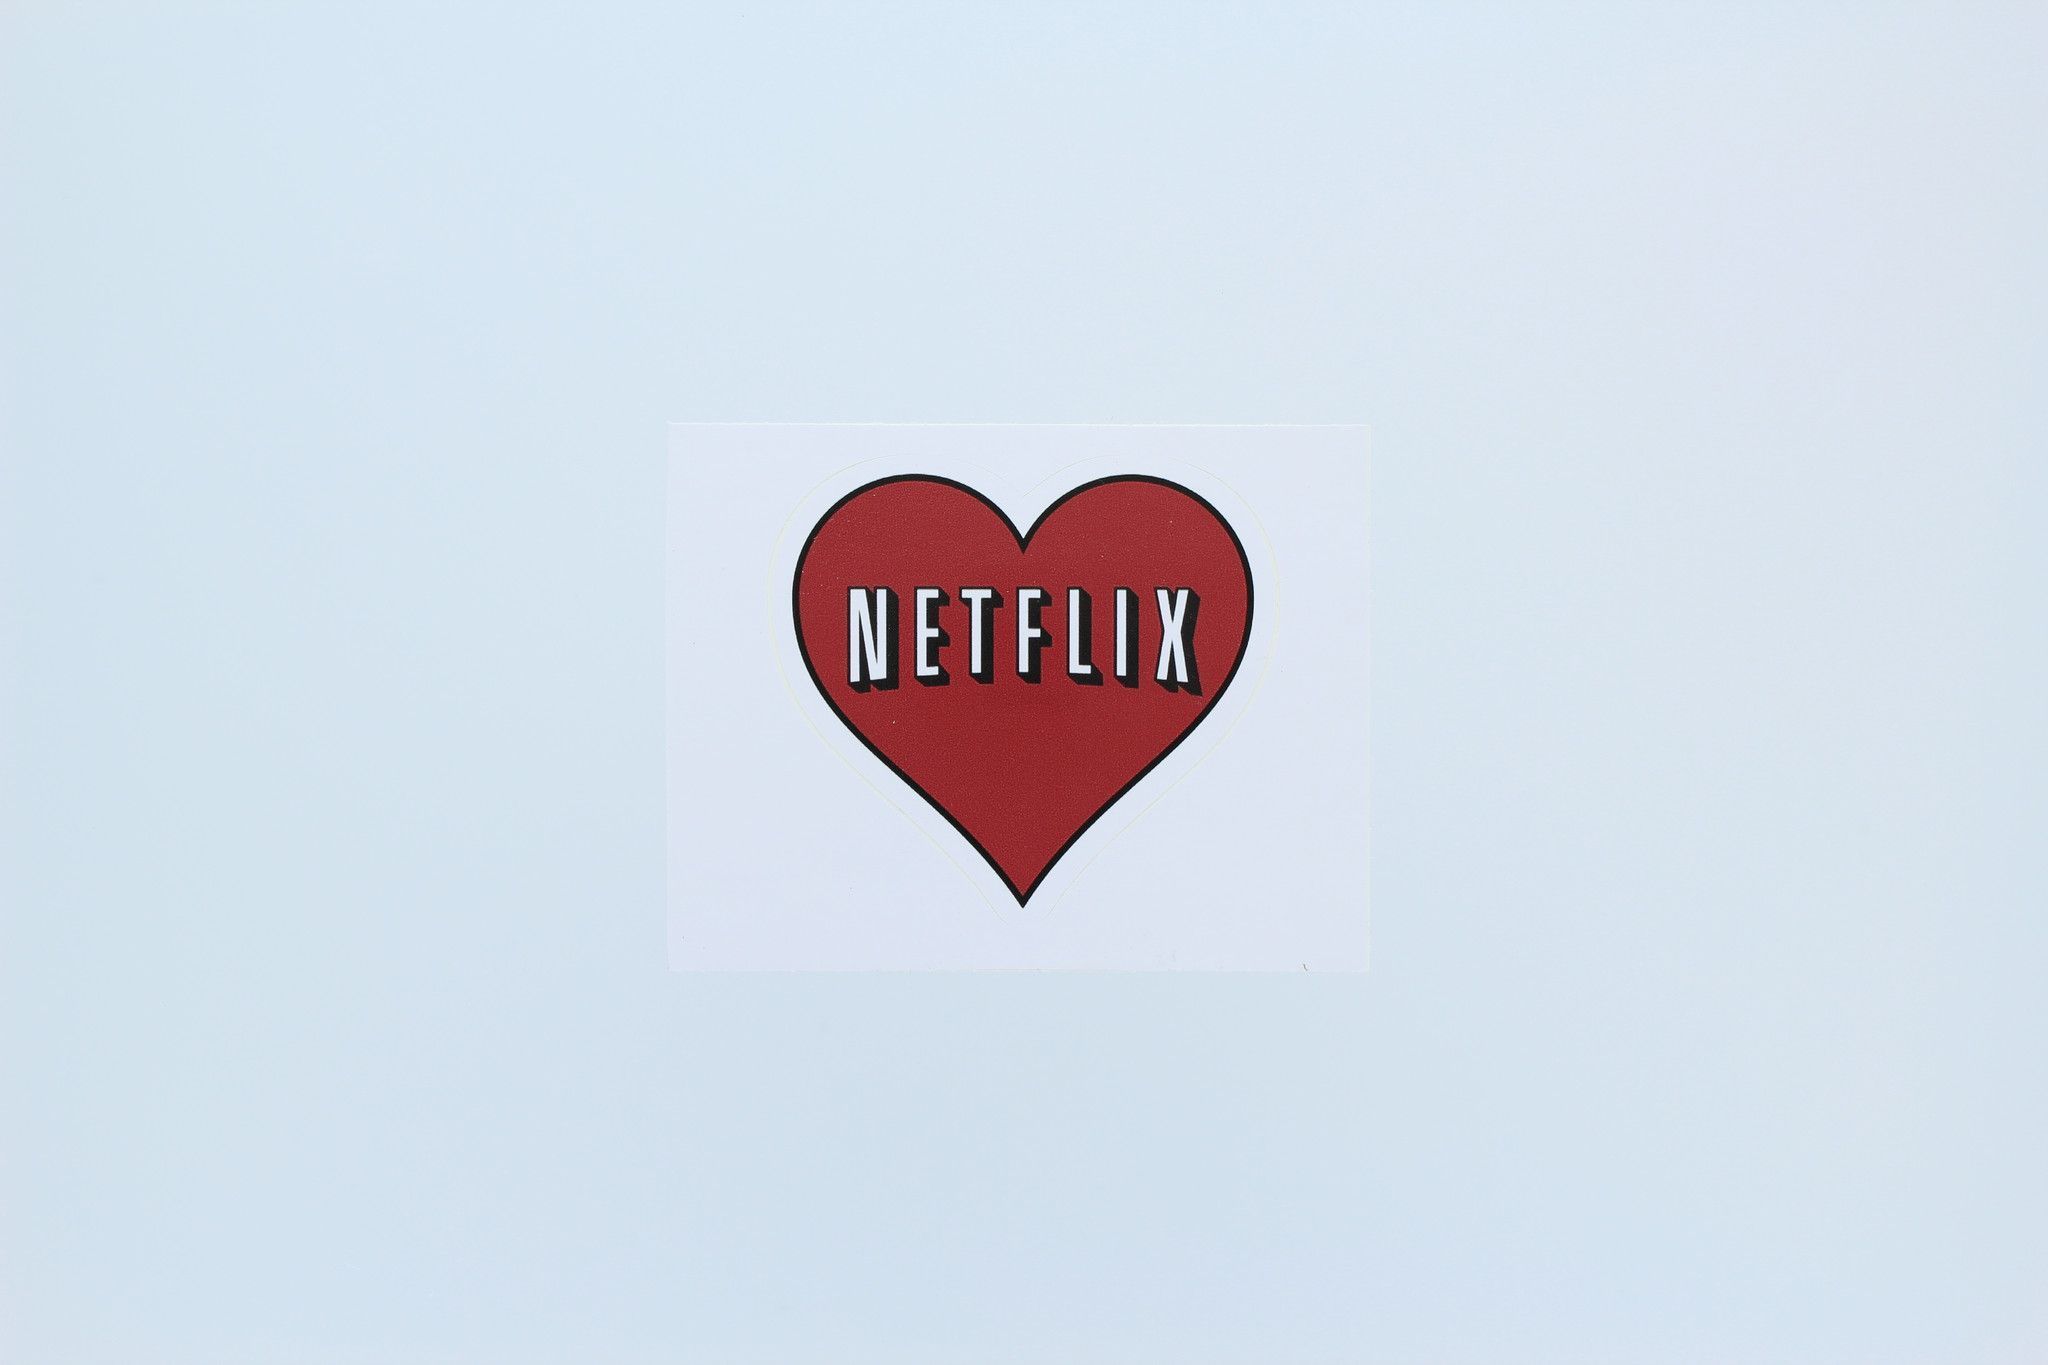 A heart shaped logo with the word netflix on it - Netflix